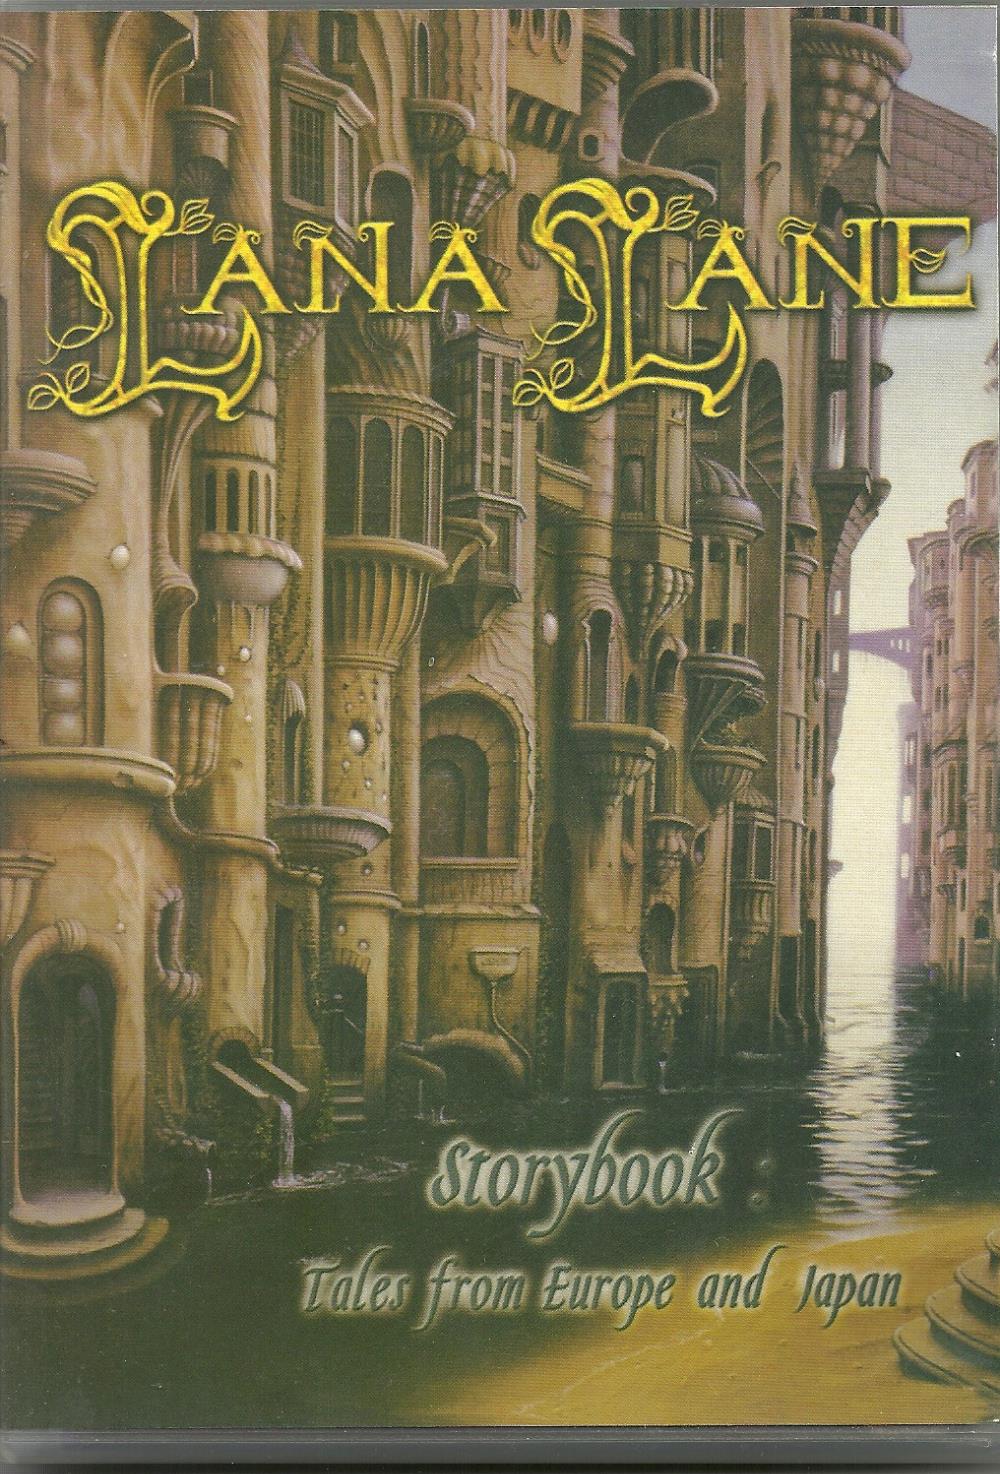 Lana Lane Storybook - Tales from Europe and Japan album cover